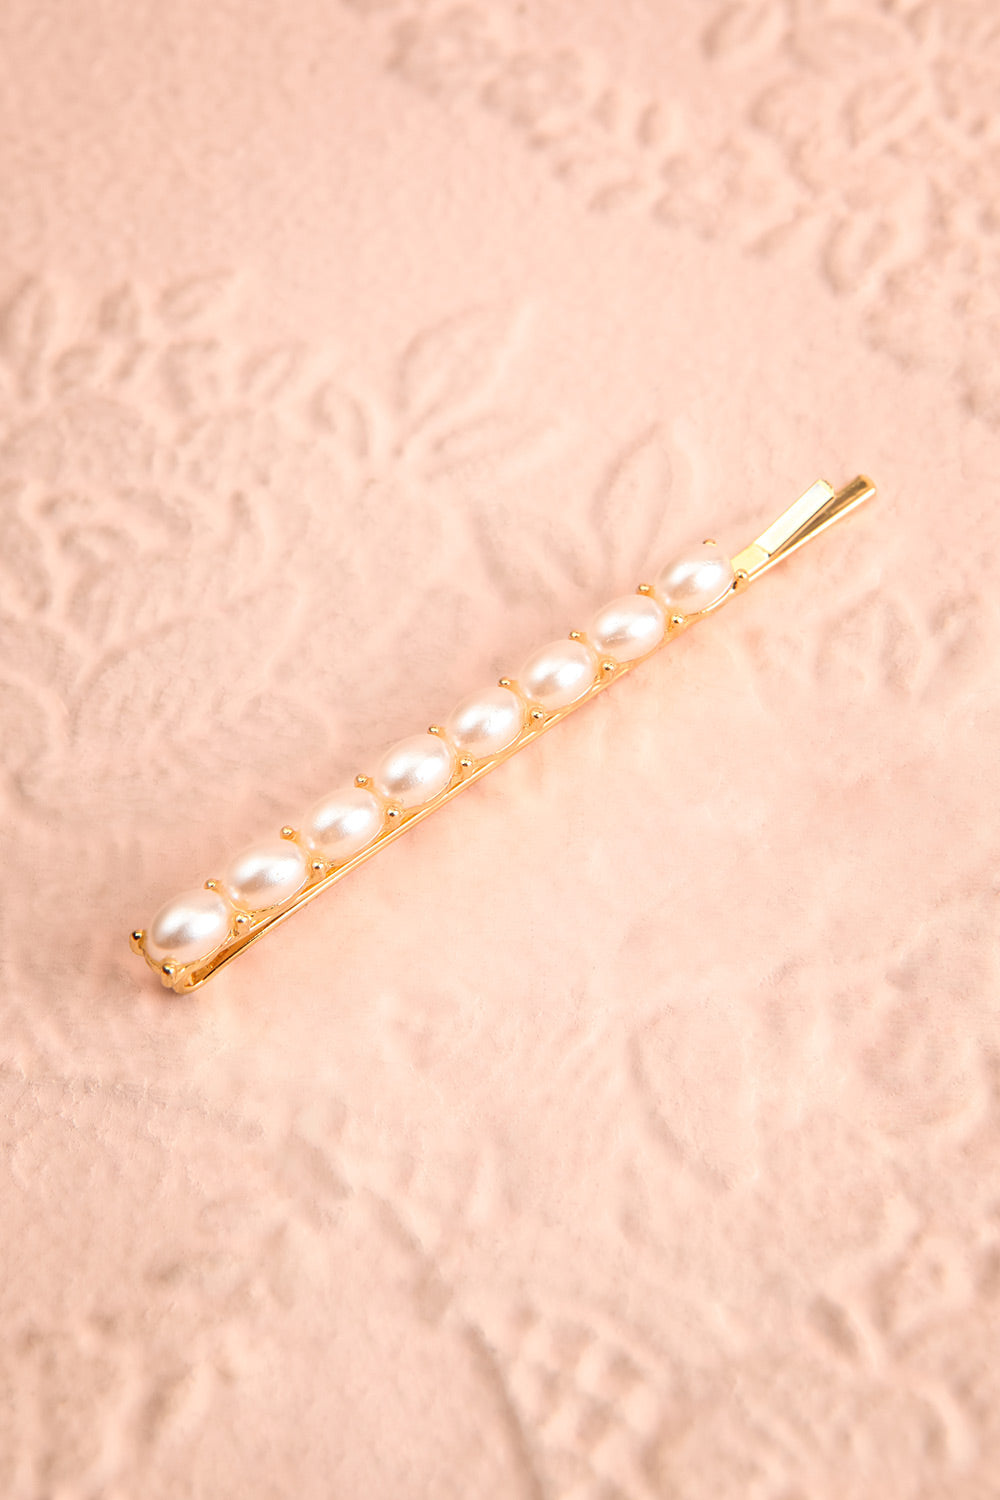 Elgines Set of 3 Golden Bobby Pins w/ Pearls | Boutique 1861 flat